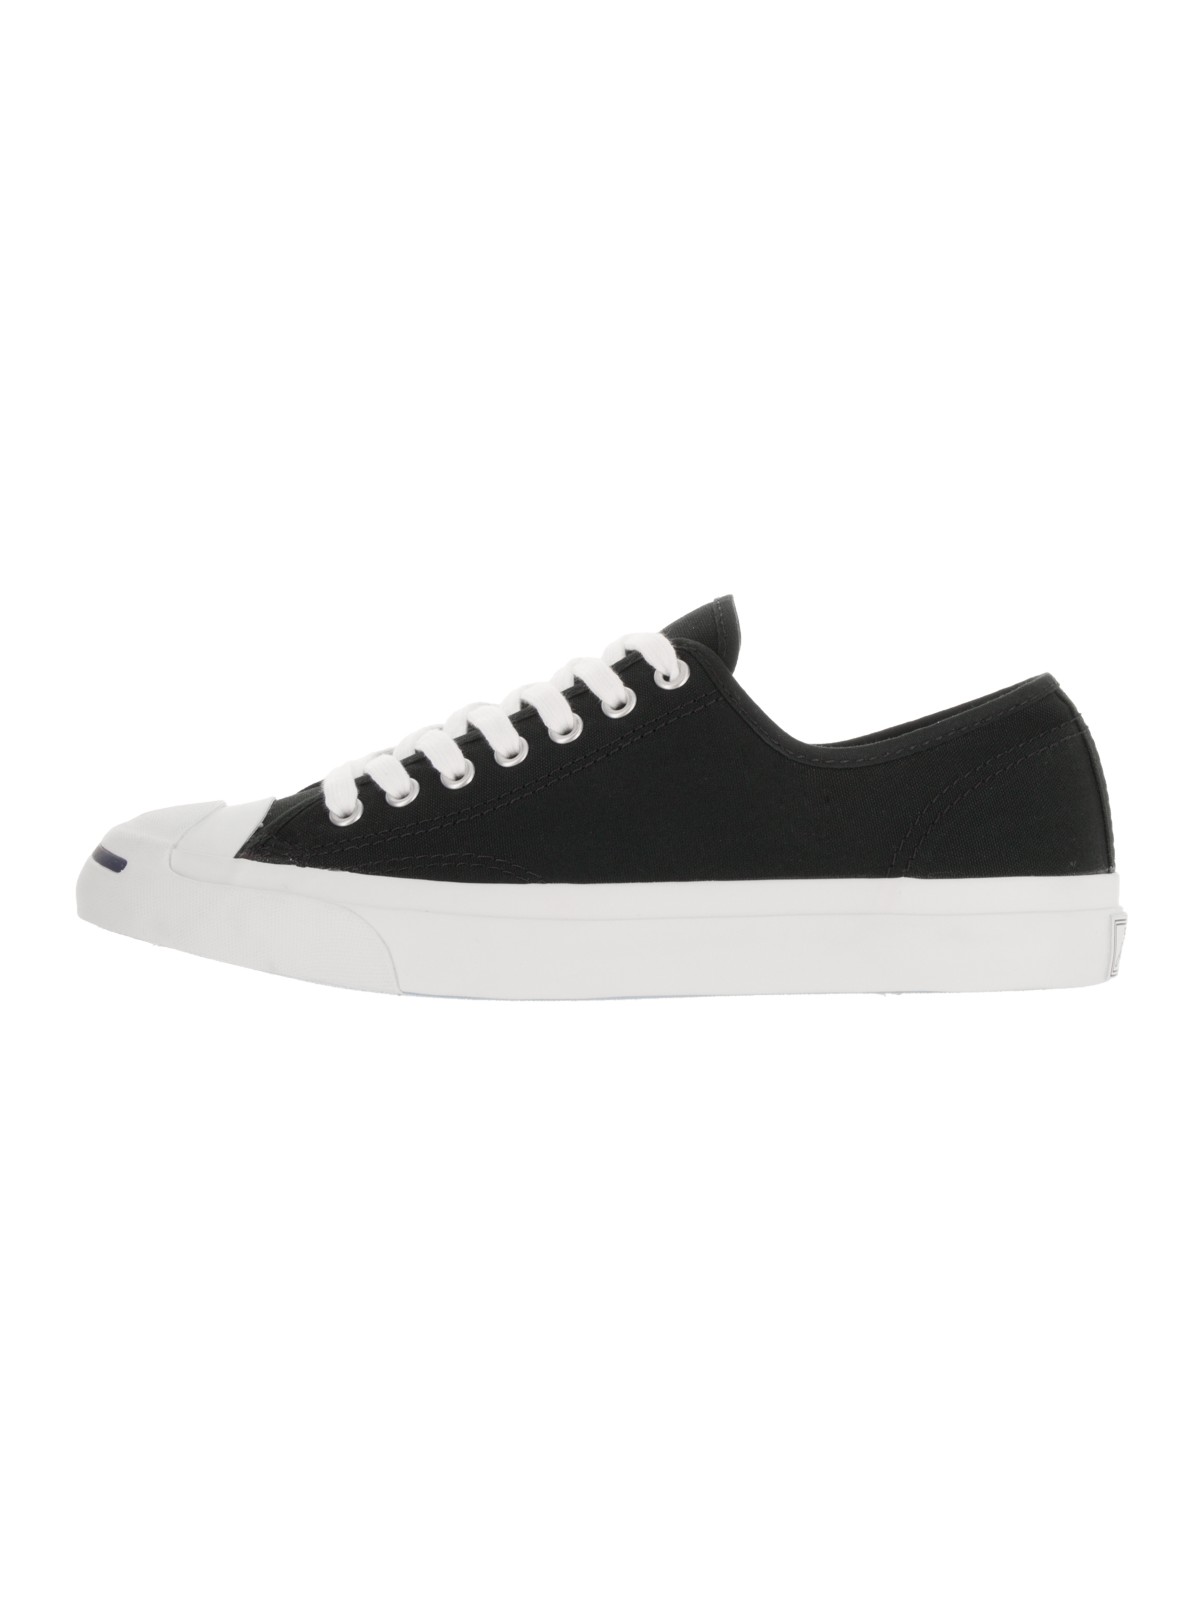 Converse Unisex Jack Purcell Cp Ox Casual Shoe - image 3 of 5